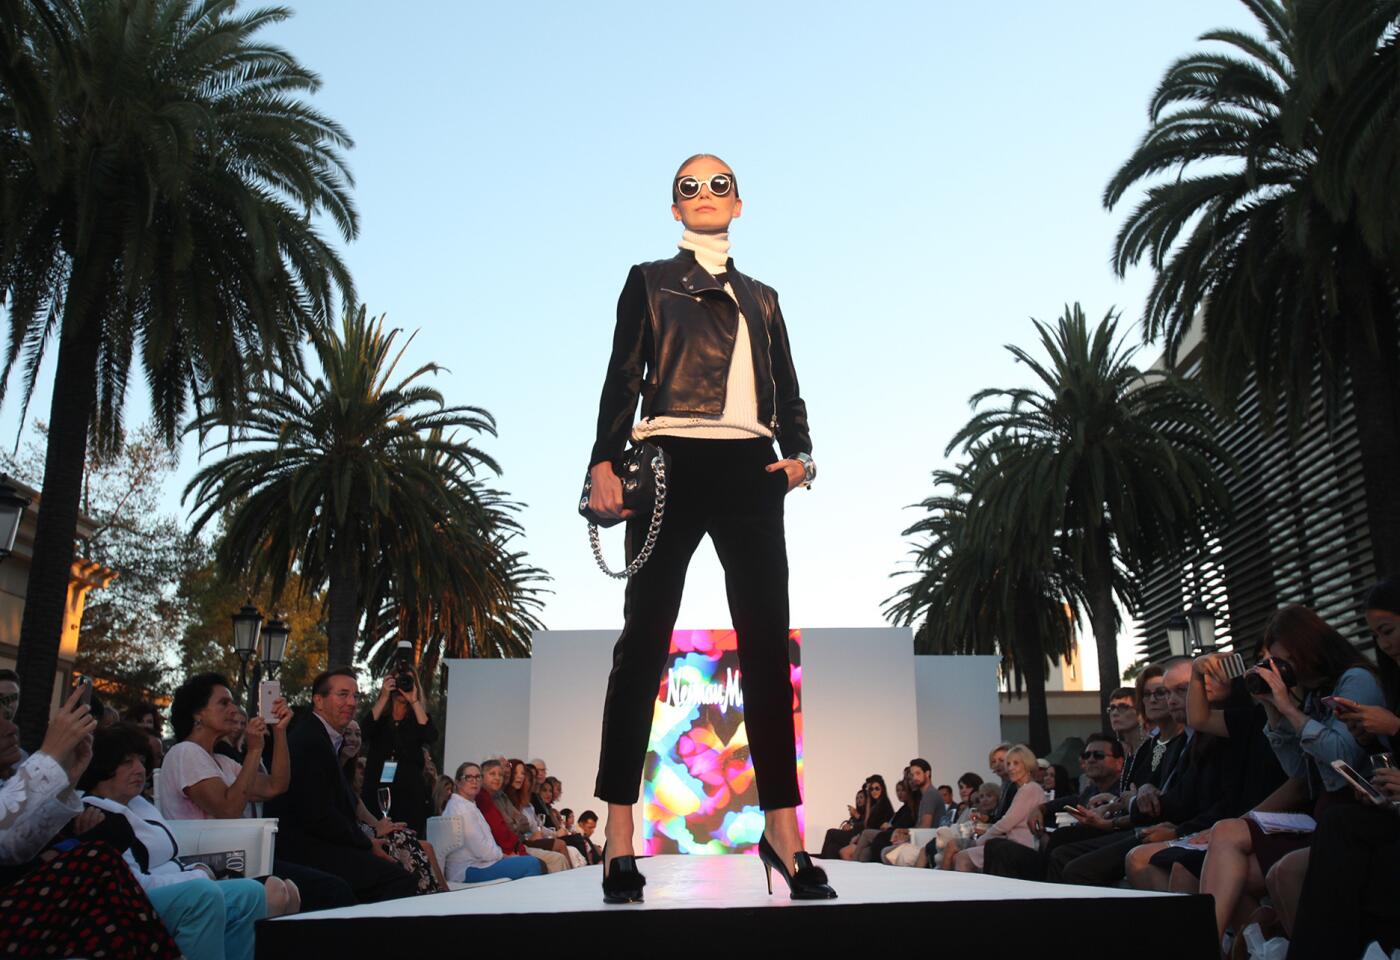 A model shows off the latest fashions from Neiman Marcus during STYLE WEEK OC runway fashion show at Fashion Island on Thursday. The event showcased fall trends inspired by various themes including shades of berry, fall florals, and Military-inspired pieces that featured popular bomber jackets.